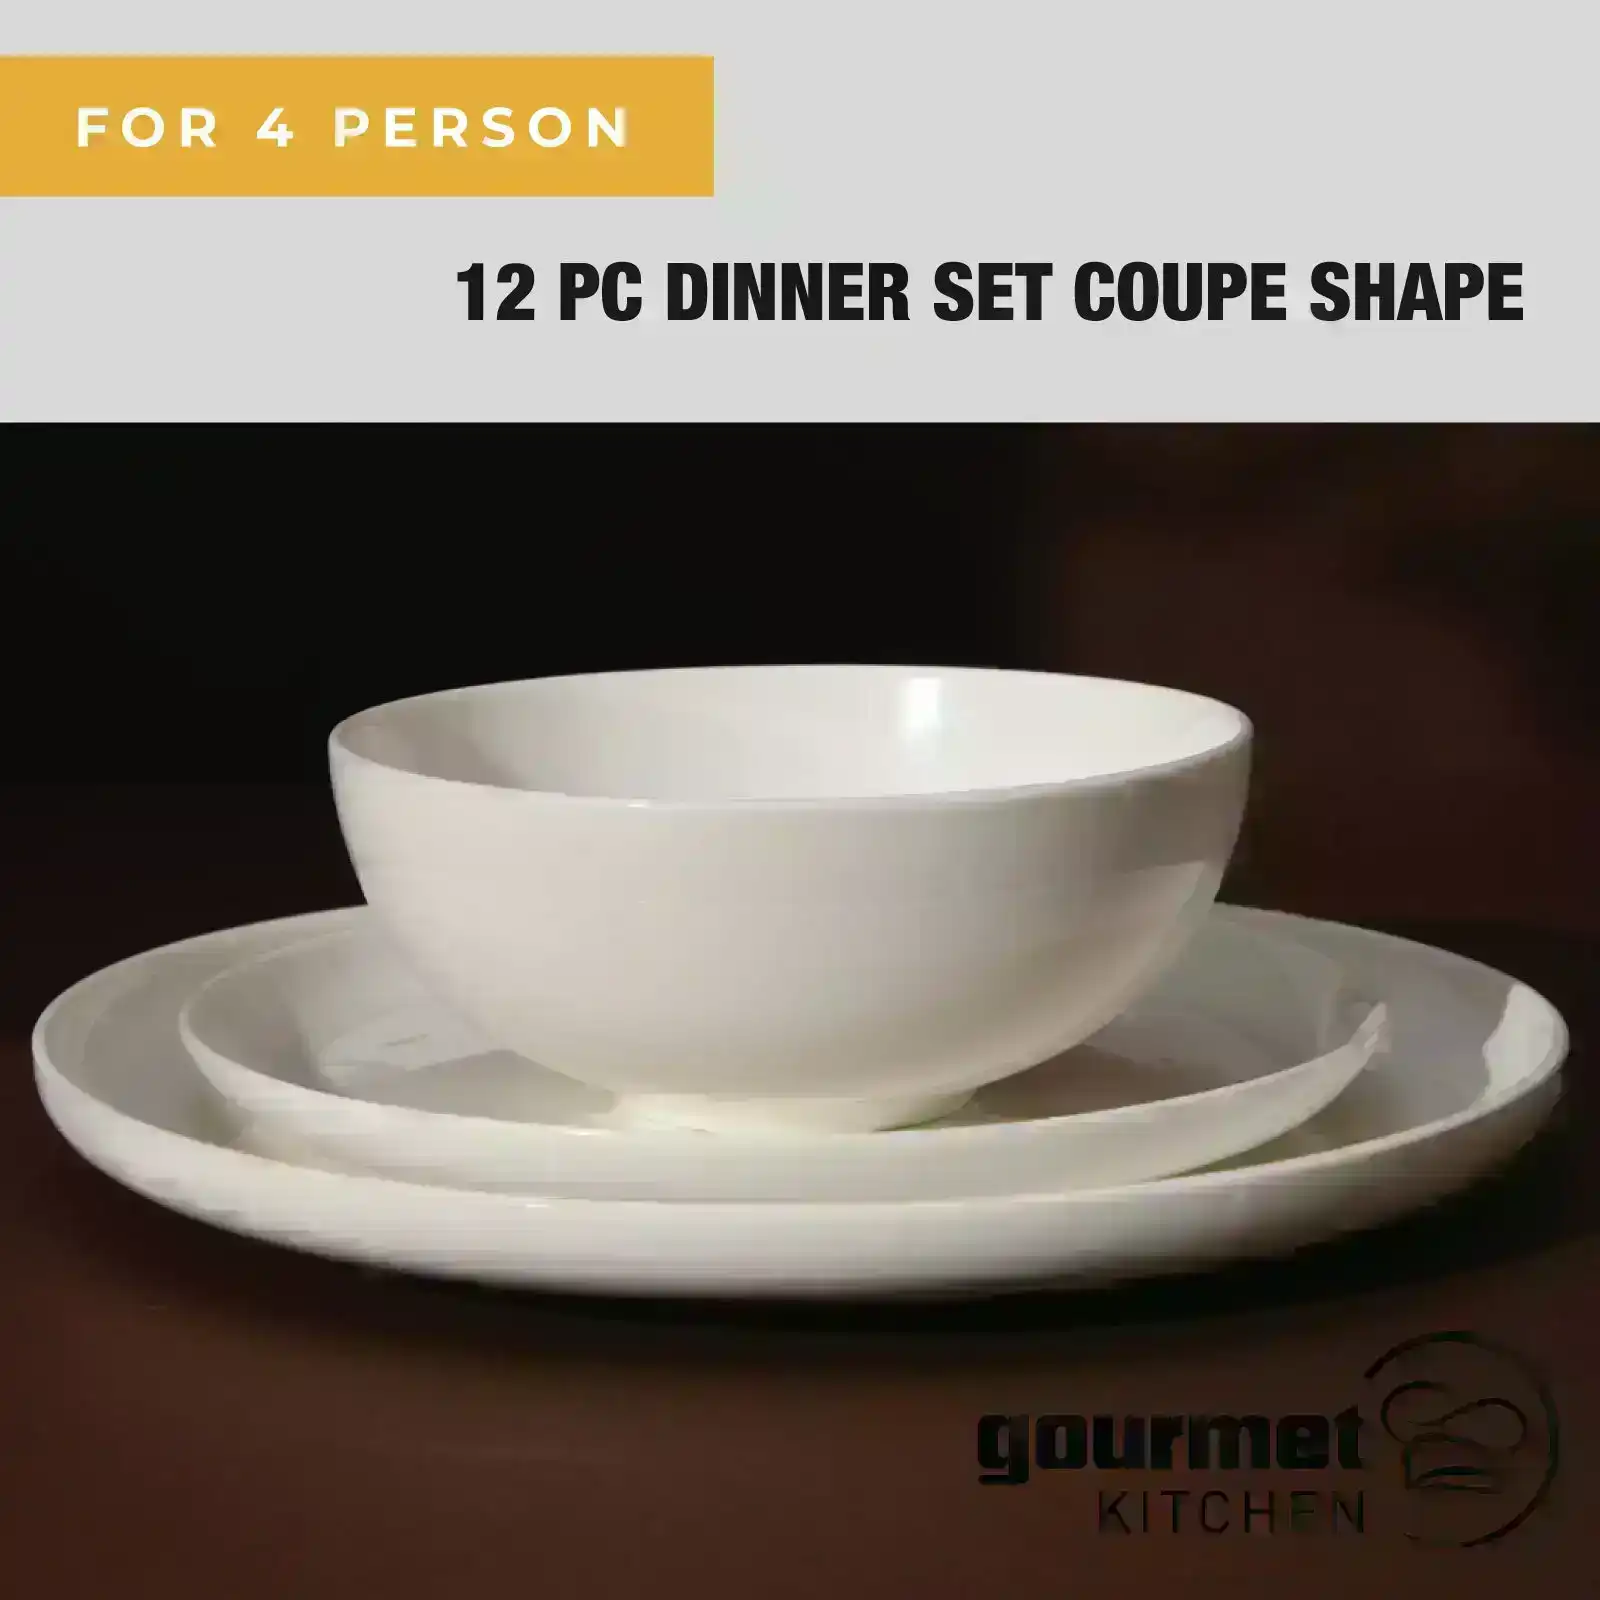 Gourmet Kitchen Essential 12 PC Dinner Set Coupe Shape Gloss Glaze White 4 Person